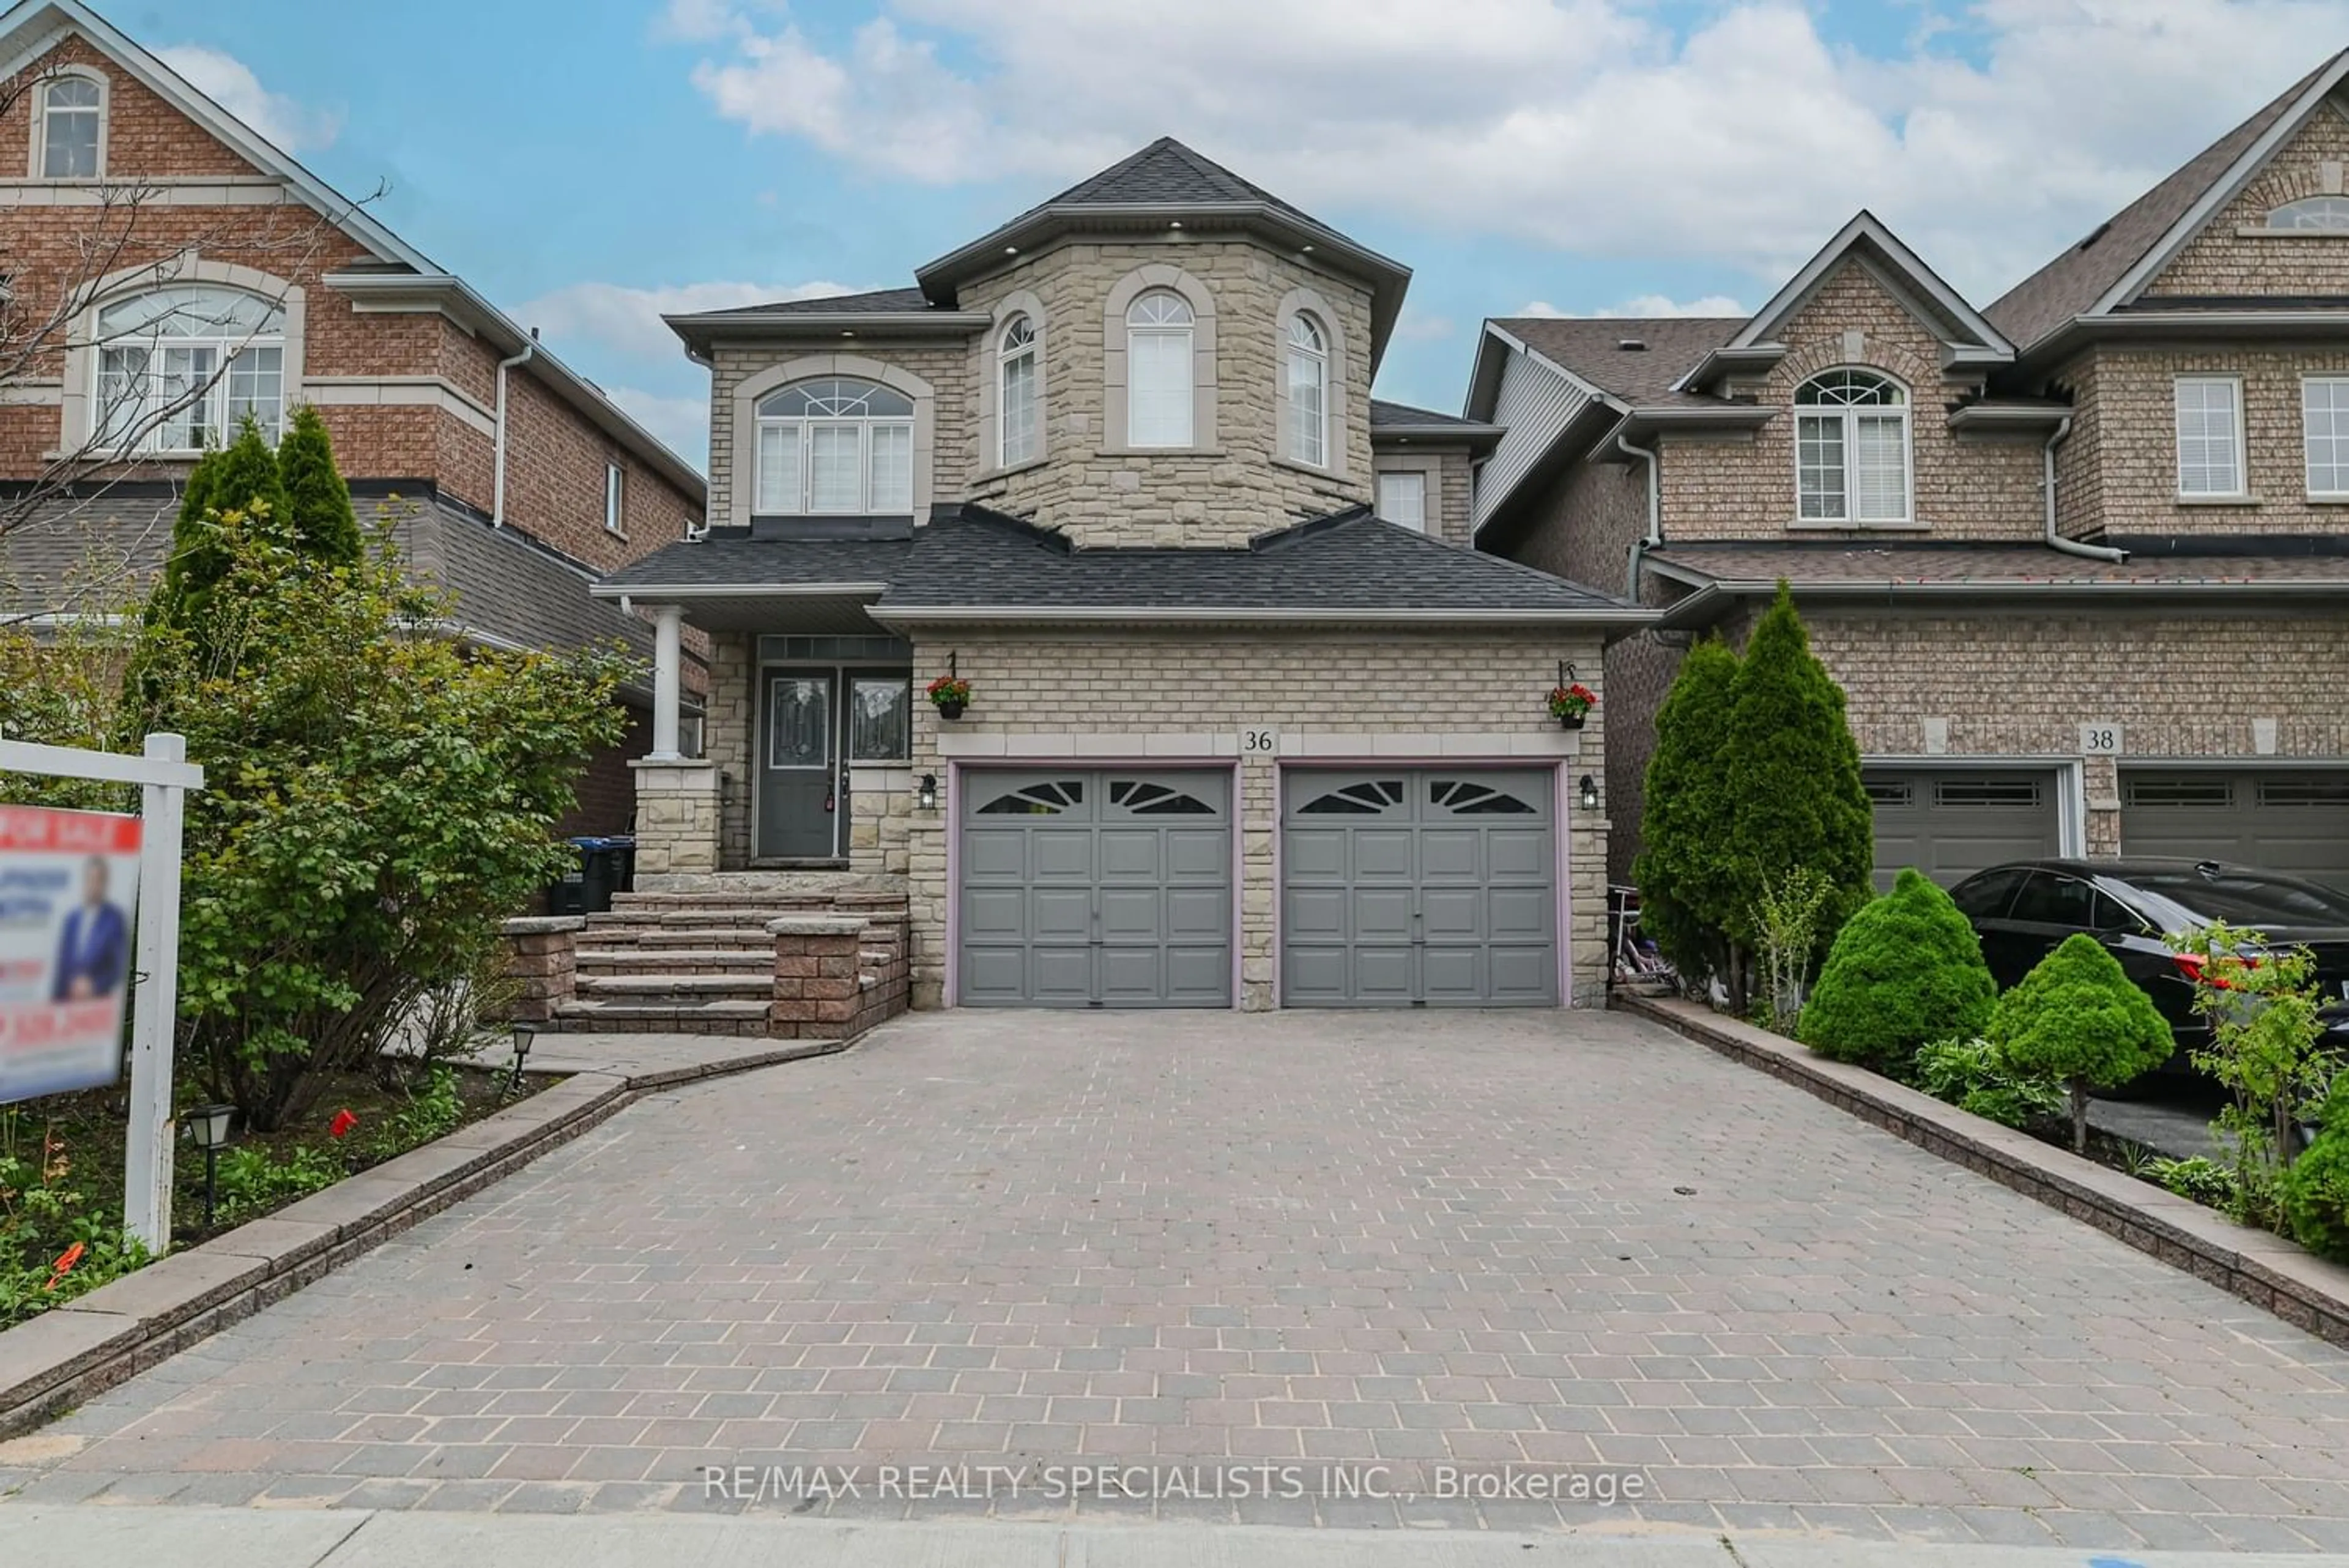 Frontside or backside of a home for 36 Blue Diamond Dr, Brampton Ontario L6S 6J2